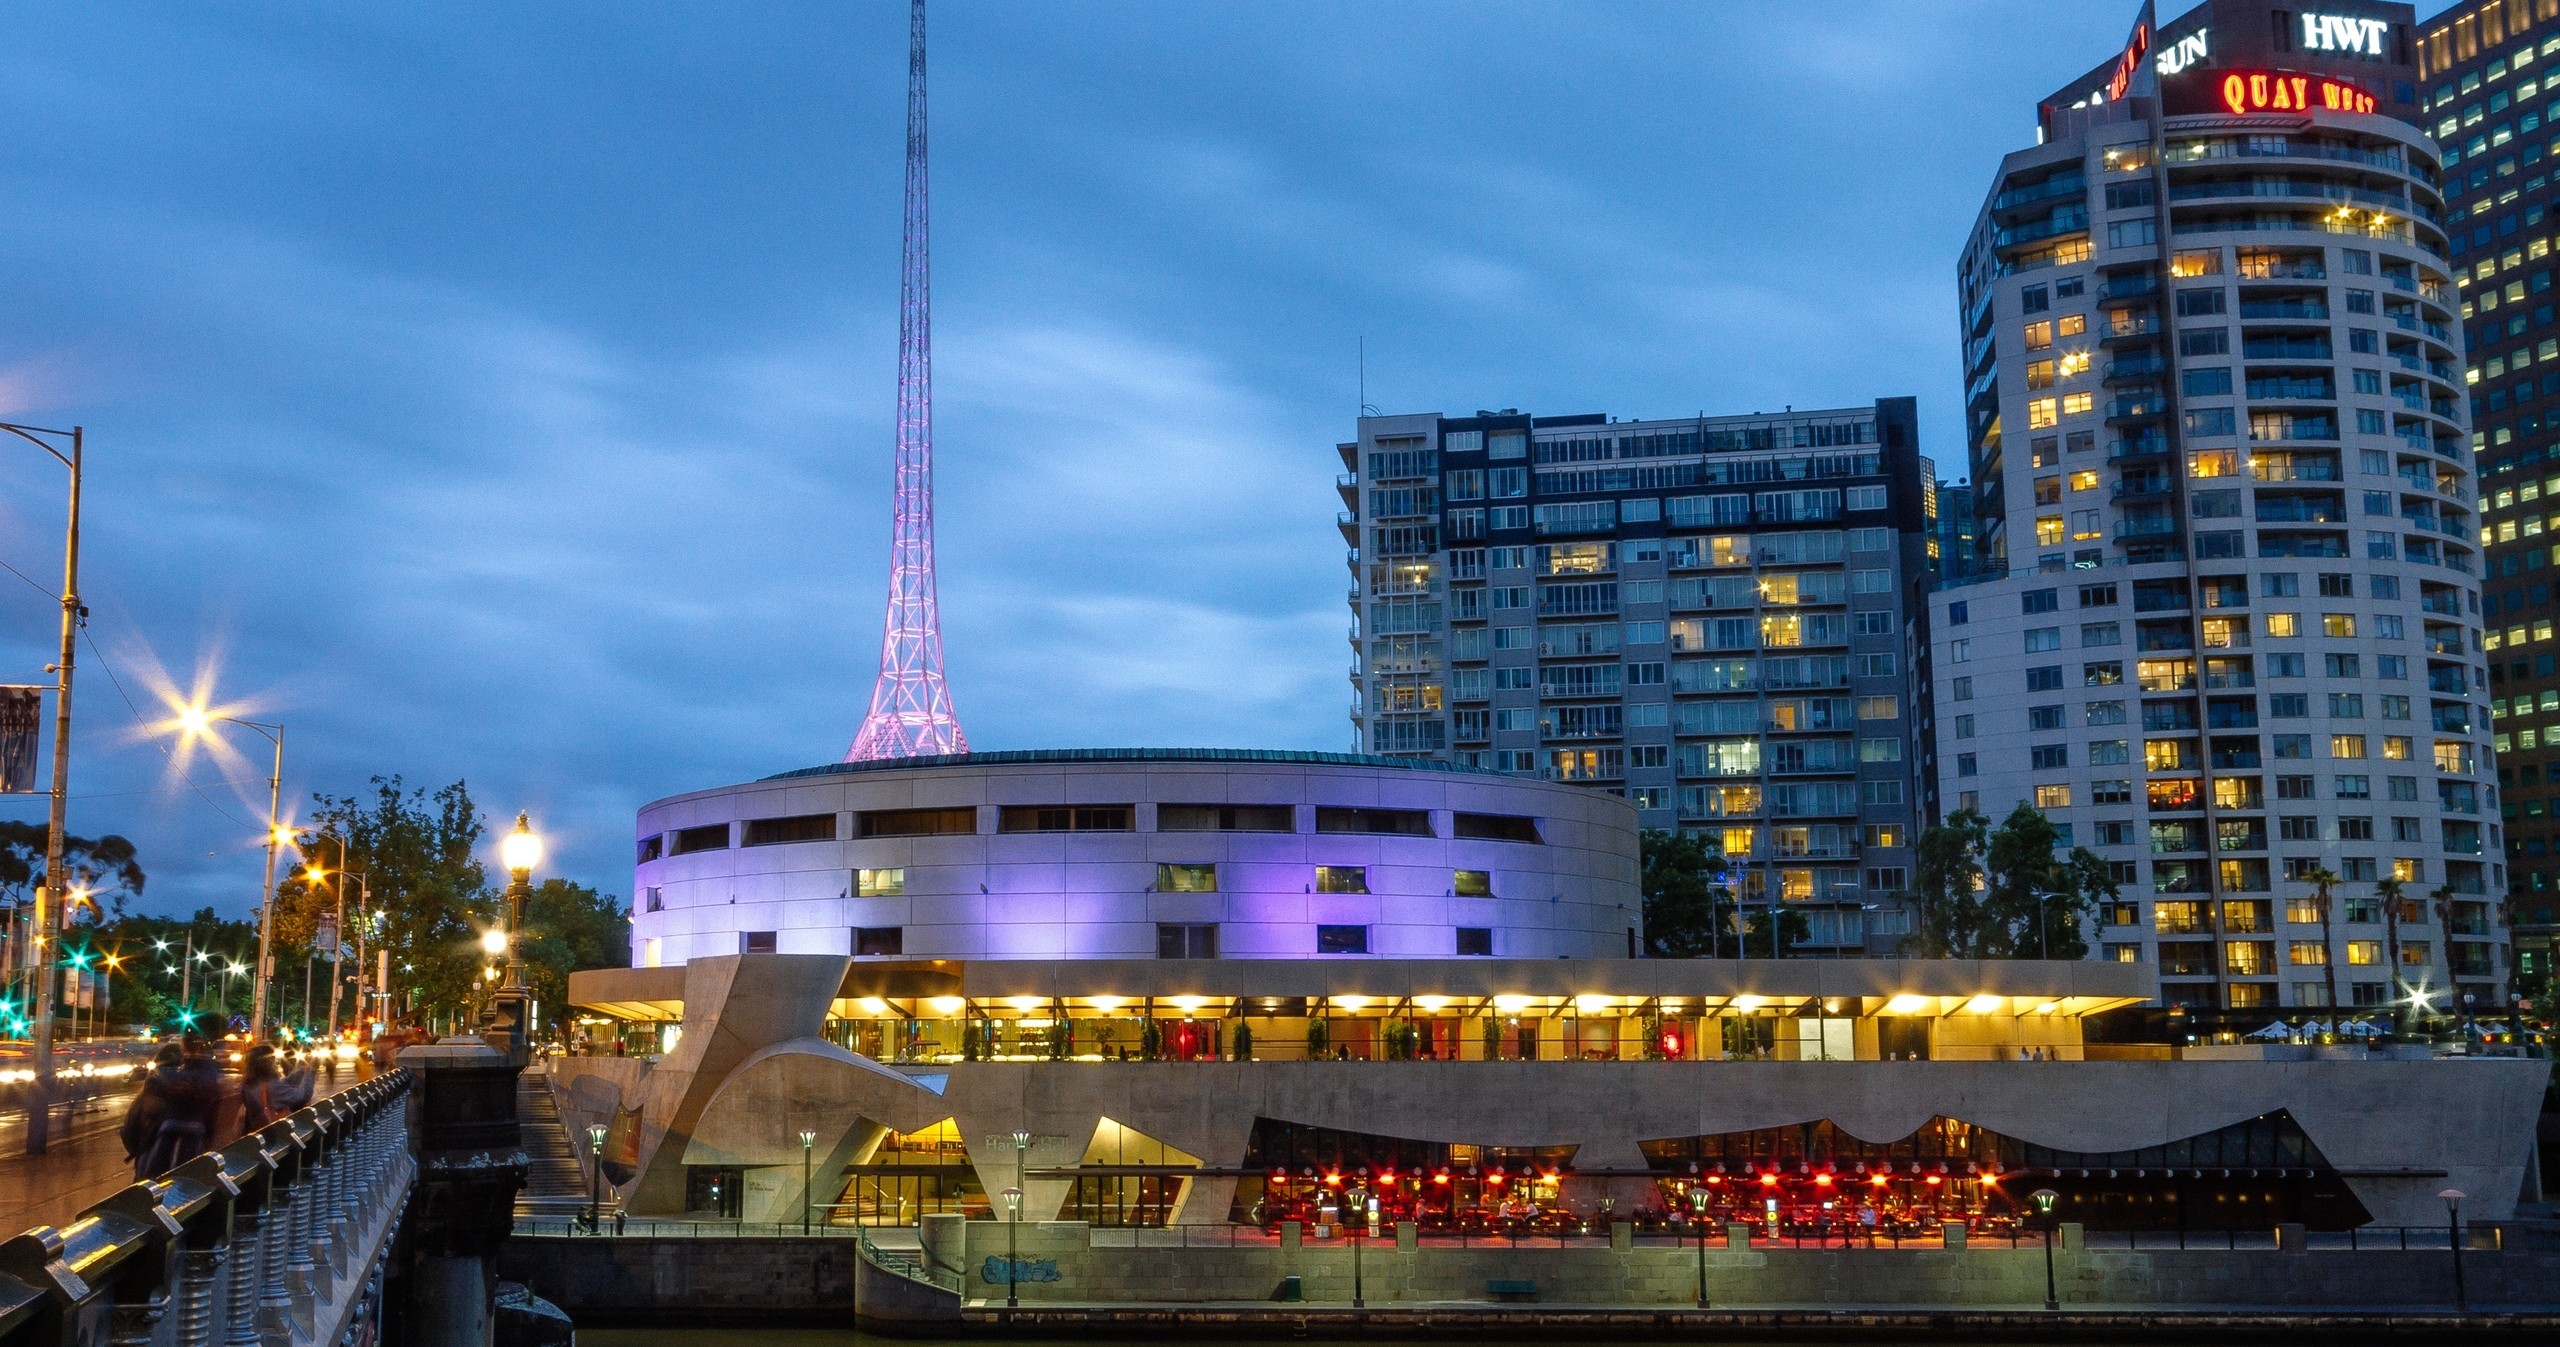 3.5-Hour Melbourne City Discovery Tour to Explore the City's Culture and History 